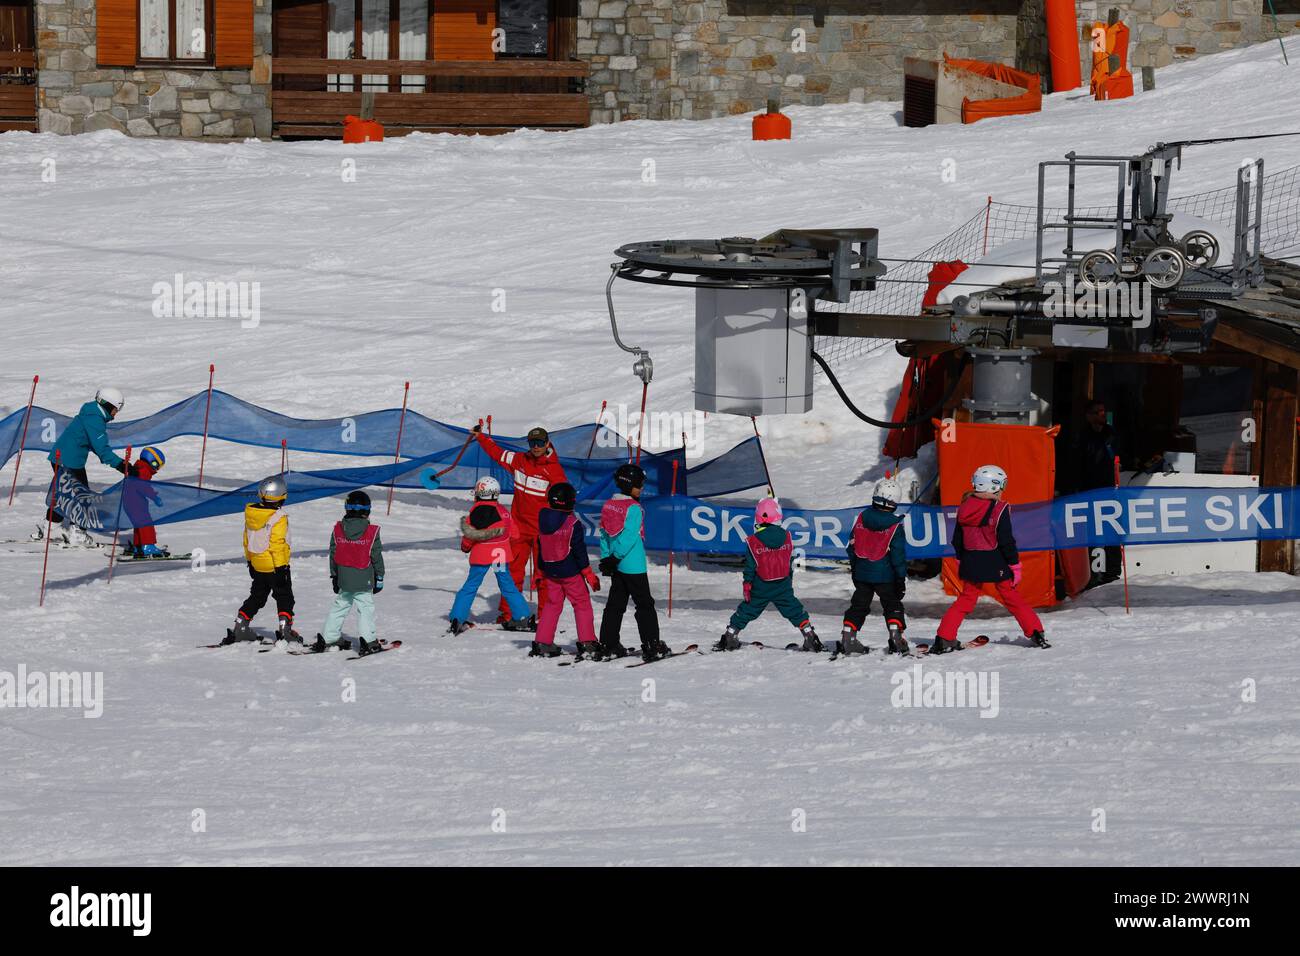 Children learning to ski listen to their instructor at the button lift for the beginner's slope in the Lavachet district of Tignes in the French Alps. Stock Photo